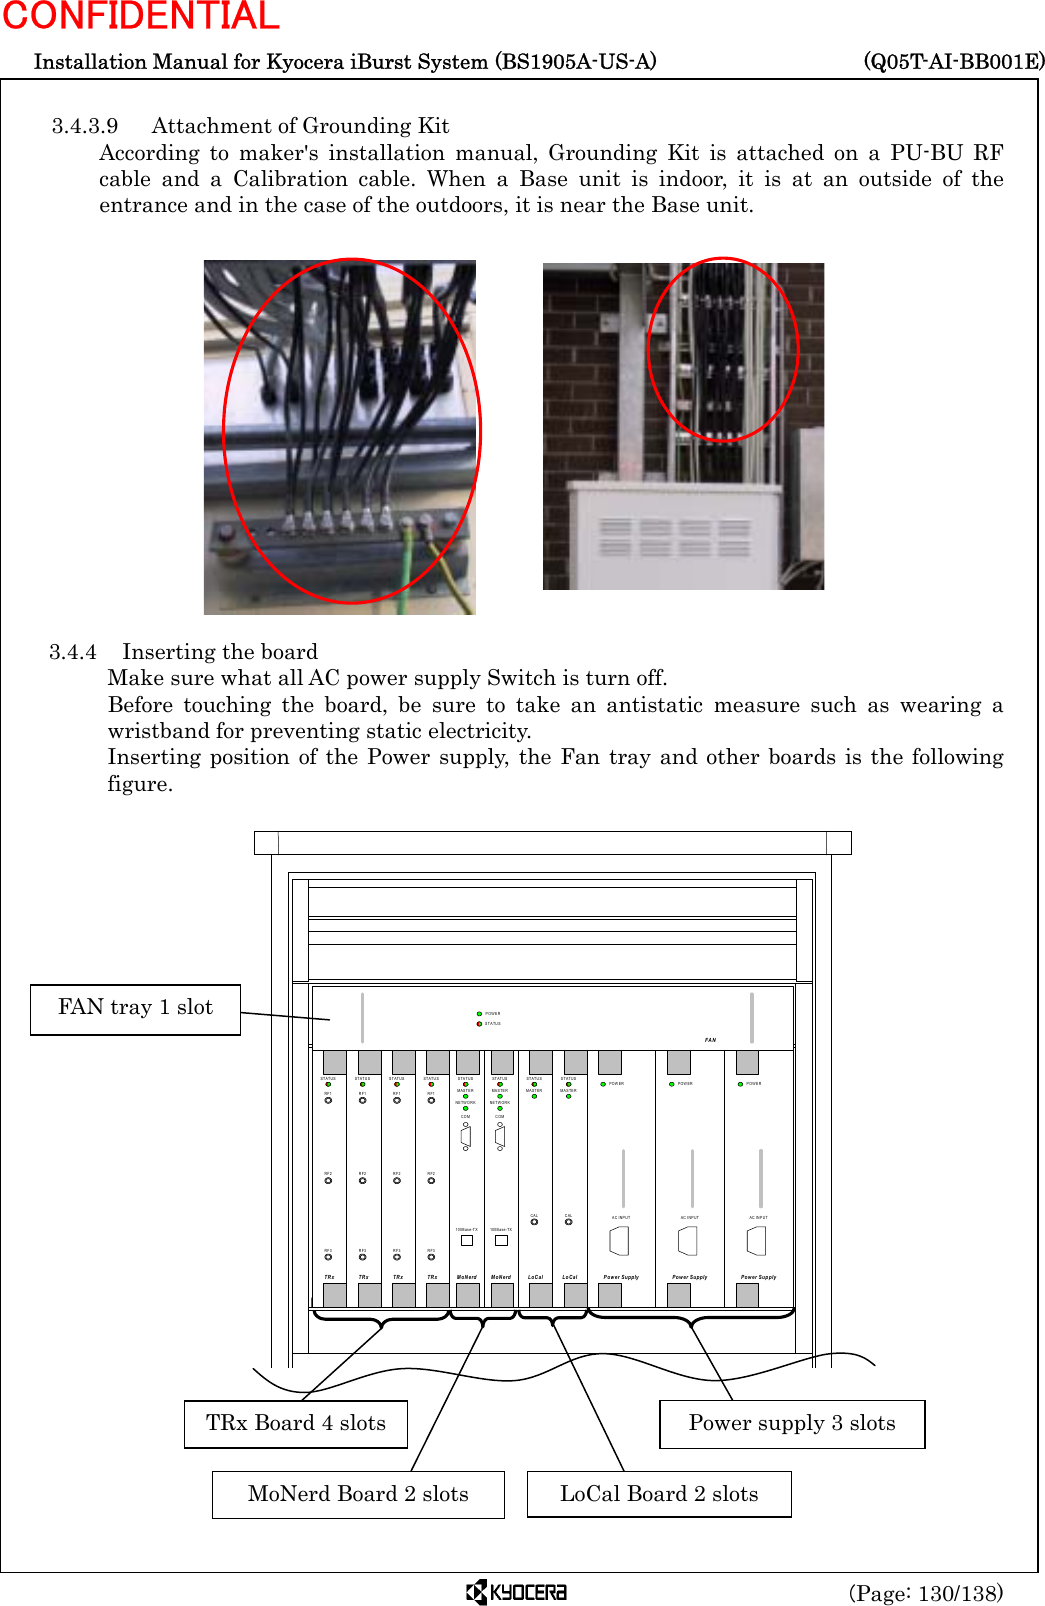  Installation Manual for Kyocera iBurst System (BS1905A-US-A)     (Q05T-AI-BB001E) (Page: 130/138) CONFIDENTIAL  3.4.3.9  Attachment of Grounding Kit According to maker&apos;s installation manual, Grounding Kit is attached on a PU-BU RF cable and a Calibration cable. When a Base unit is indoor, it is at an outside of the entrance and in the case of the outdoors, it is near the Base unit.                 3.4.4  Inserting the board Make sure what all AC power supply Switch is turn off. Before touching the board, be sure to take an antistatic measure such as wearing a wristband for preventing static electricity. Inserting position of the Power supply, the Fan tray and other boards is the following figure.                                RF1RF2RF3TRxSTATUSRF1RF2RF3TRxSTATUSRF1RF2RF3TRxSTATUSRF1RF2RF3TRxSTATUSCALLoCalSTATUSMASTERCALLoCalSTATUSMASTERMoNerdSTATU SMASTERNETWORKCOM100Base-TXMoNerdSTATUSMASTERNETWORKCOM100Base-TXPower SupplyPOWERAC INPUTPower SupplyPOWERAC INPUTPower SupplyPOWERAC INPUTFANPOWERSTATUS  TRx Board 4 slots  Power supply 3 slots FAN tray 1 slot MoNerd Board 2 slots  LoCal Board 2 slots 